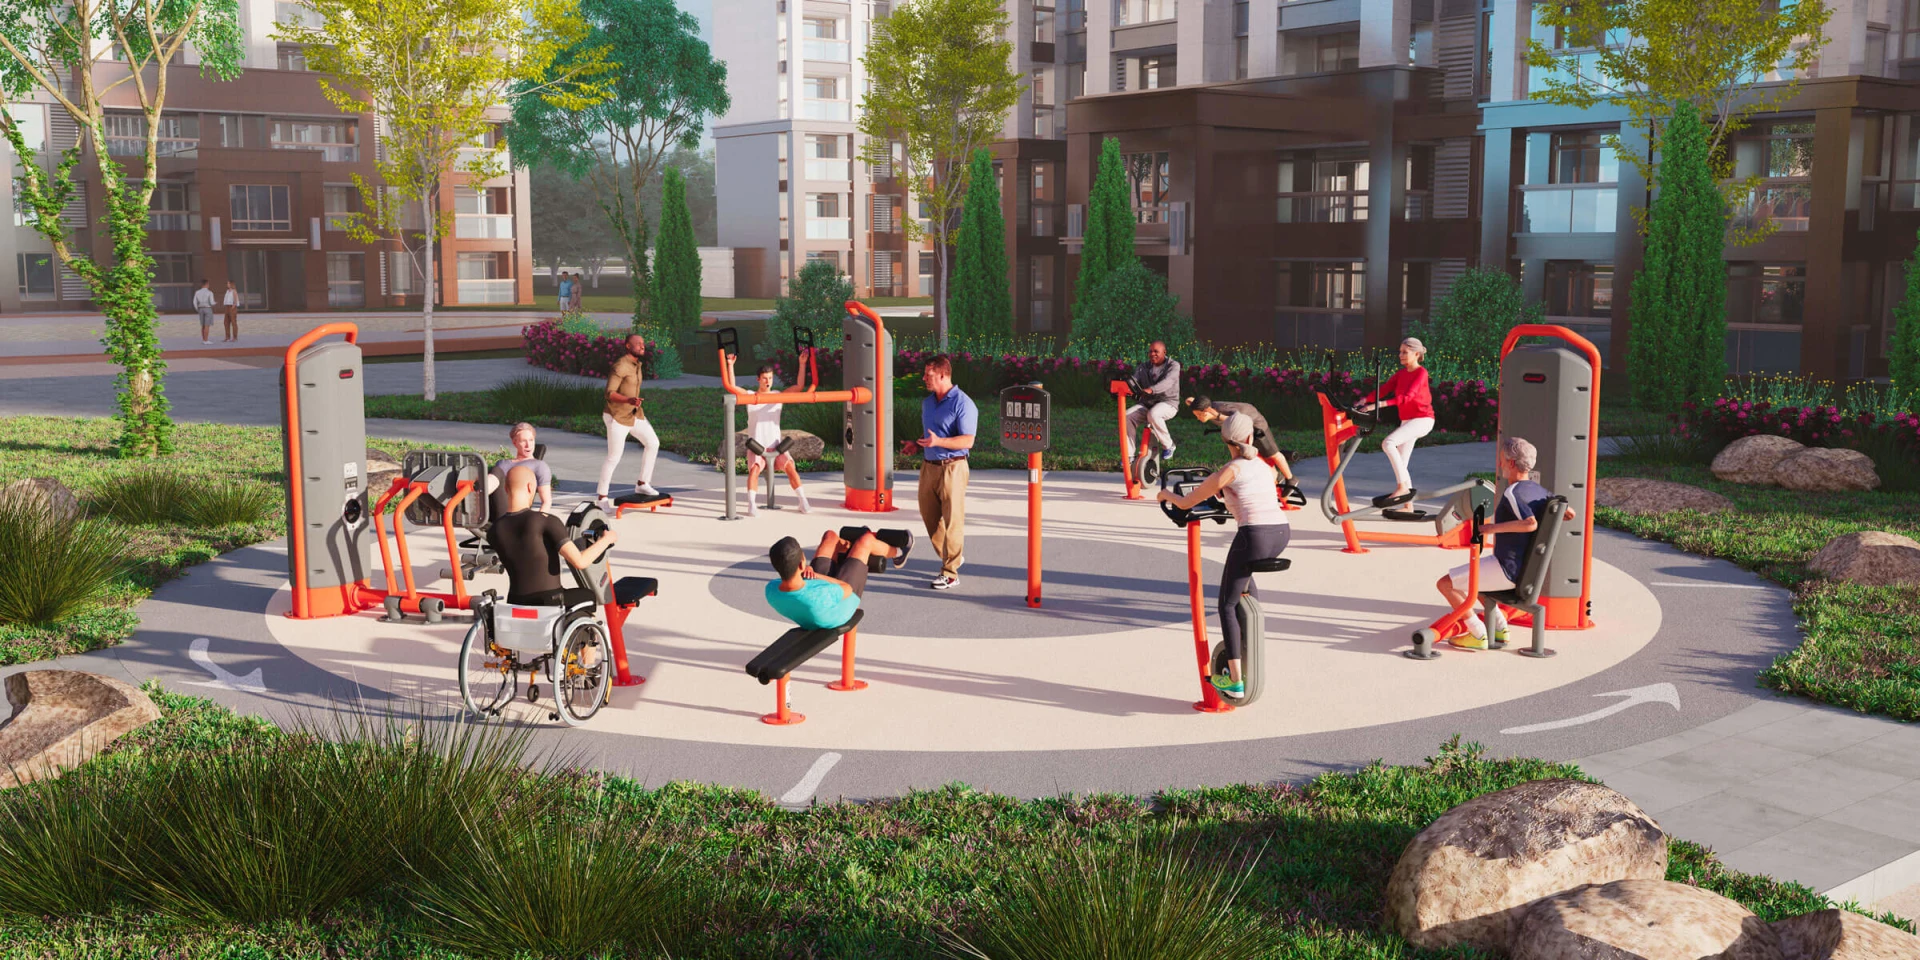 design idea of an outdoor fitness area for circuit training